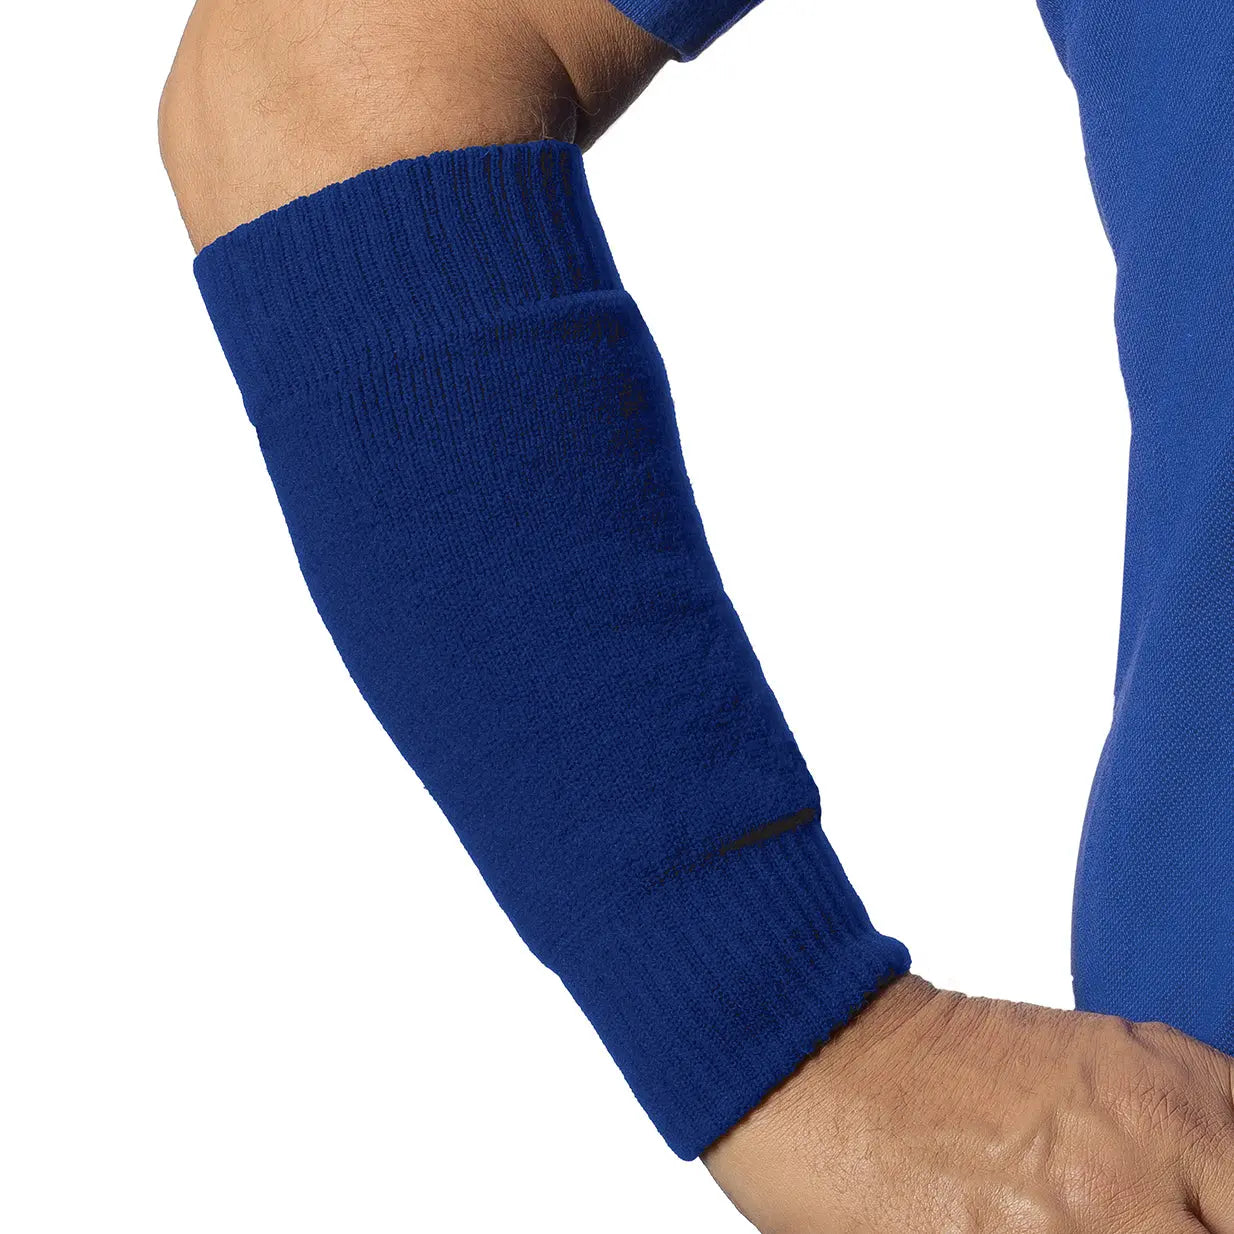 Forearm Sleeves - Light Weight. Protect Frail Skin. Prevent Skin Tears (pair) Limbkeepers